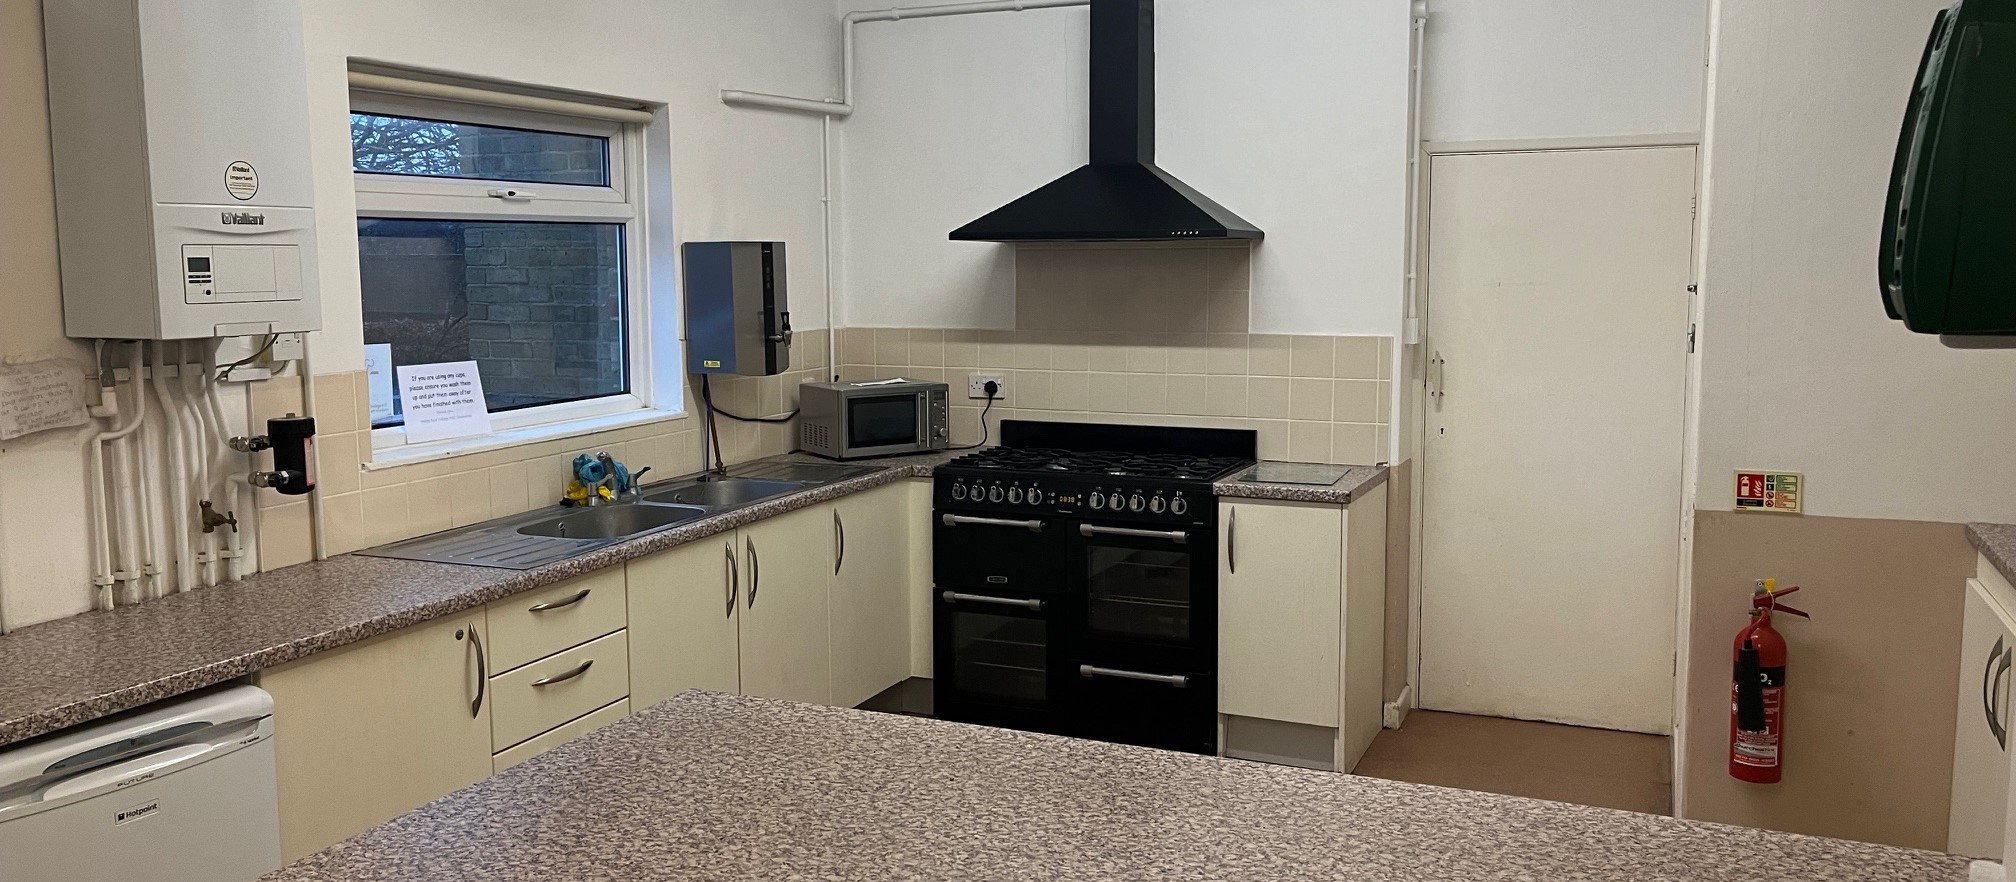 There is a large fitted kitchen at the hall with plenty of workspace. A double sized cooker, a fridge and microwave oven. There is also a dining area at the other end of the room.